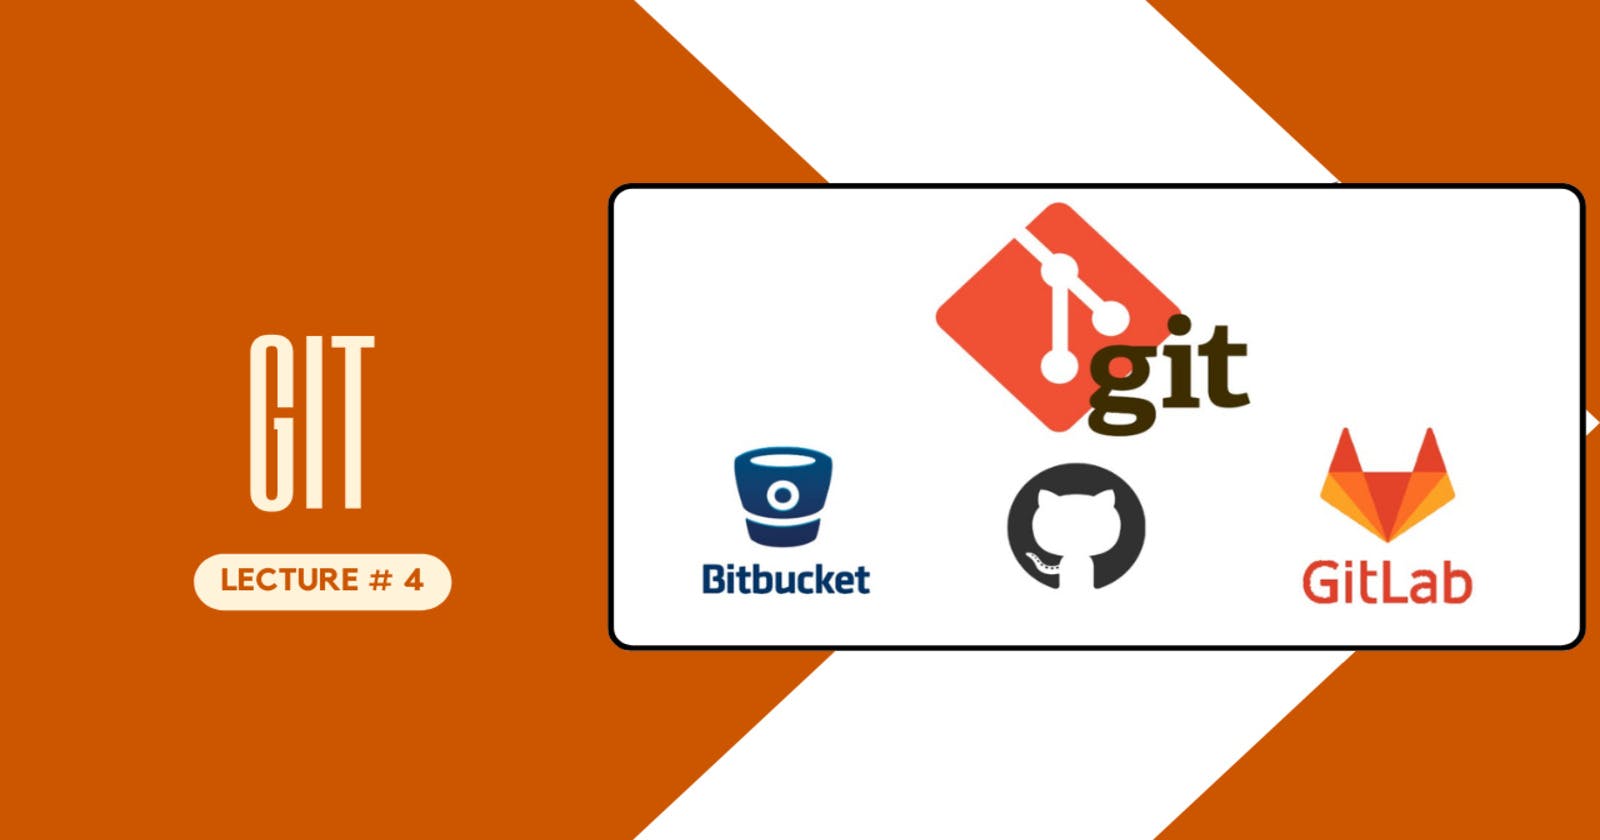 Lecture # 4 - Introduction to GitLab, GitHub, and Bitbucket